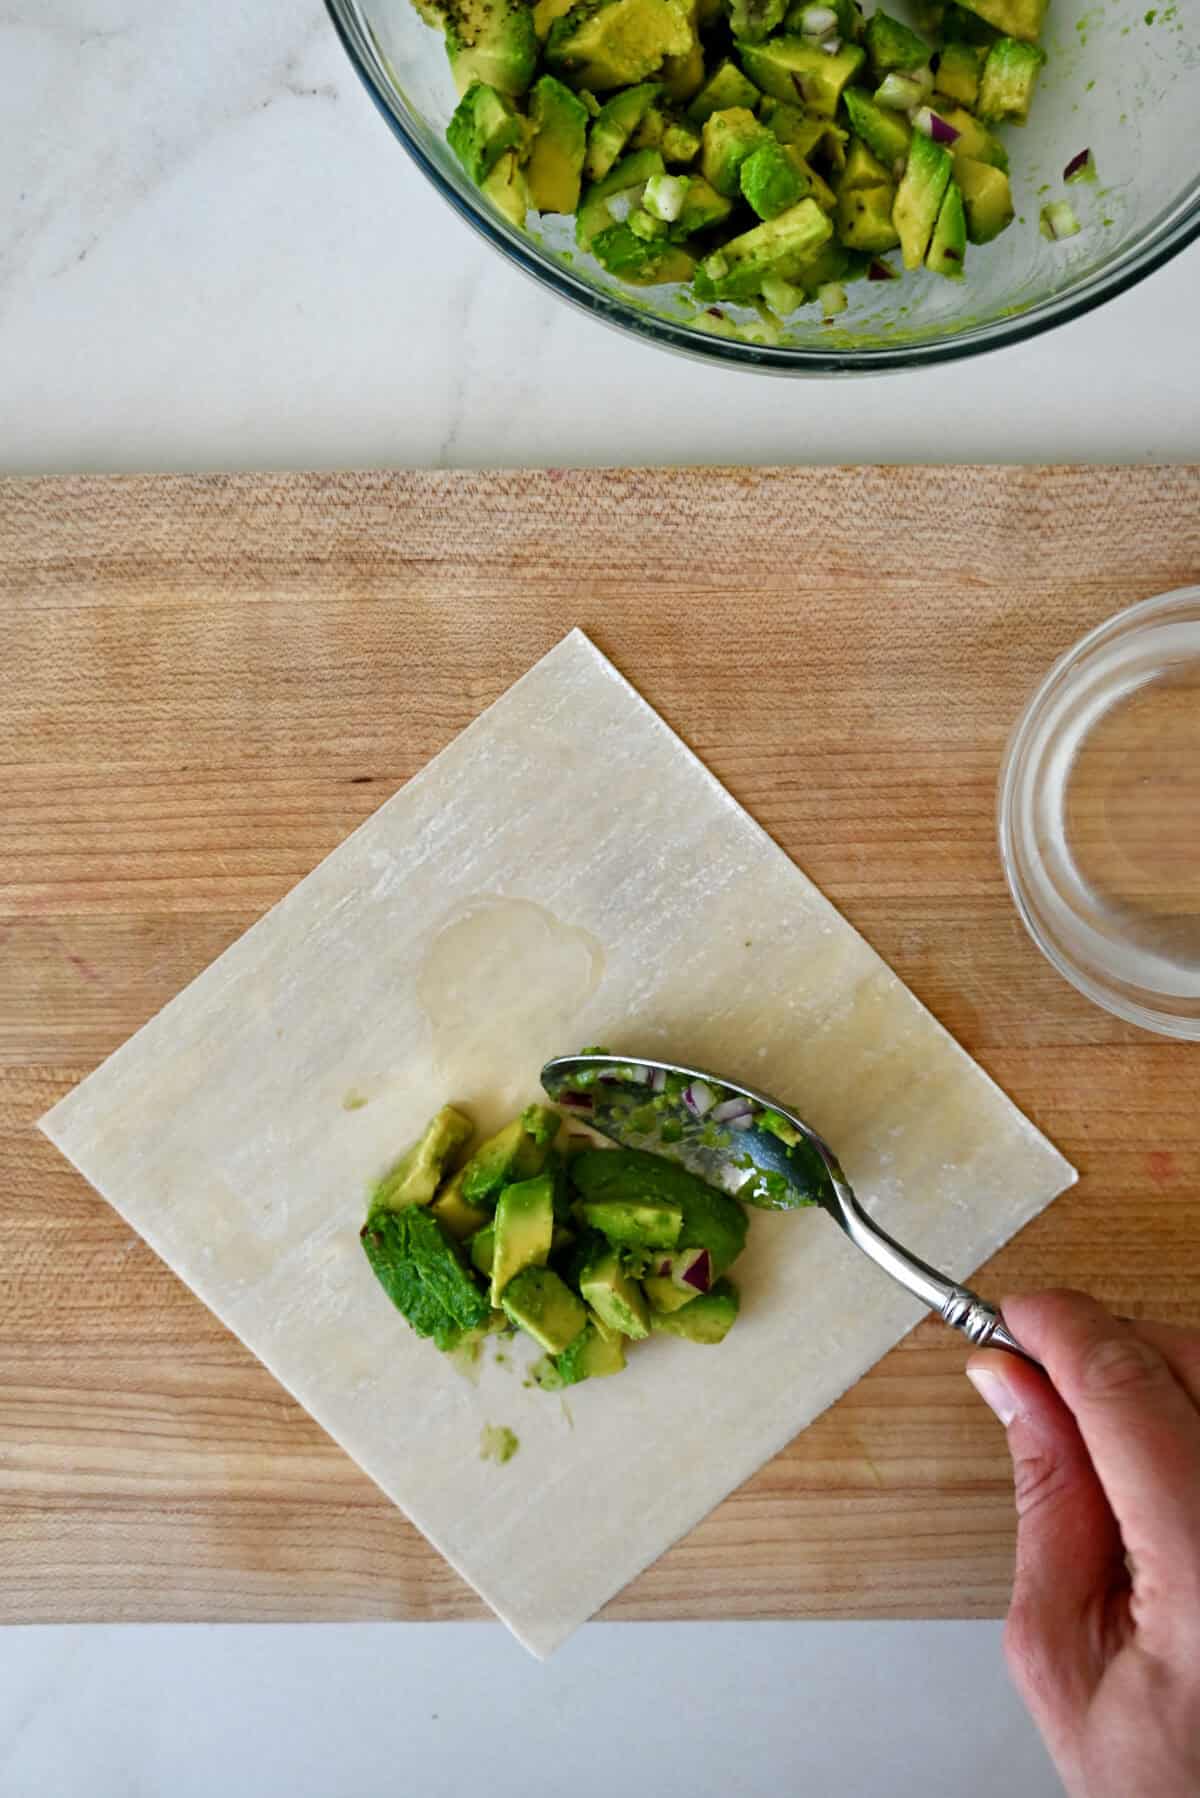 Avocado filling being spooned atop an egg roll wrapper that's on a wood cutting board along with a small glass bowl filled with water.